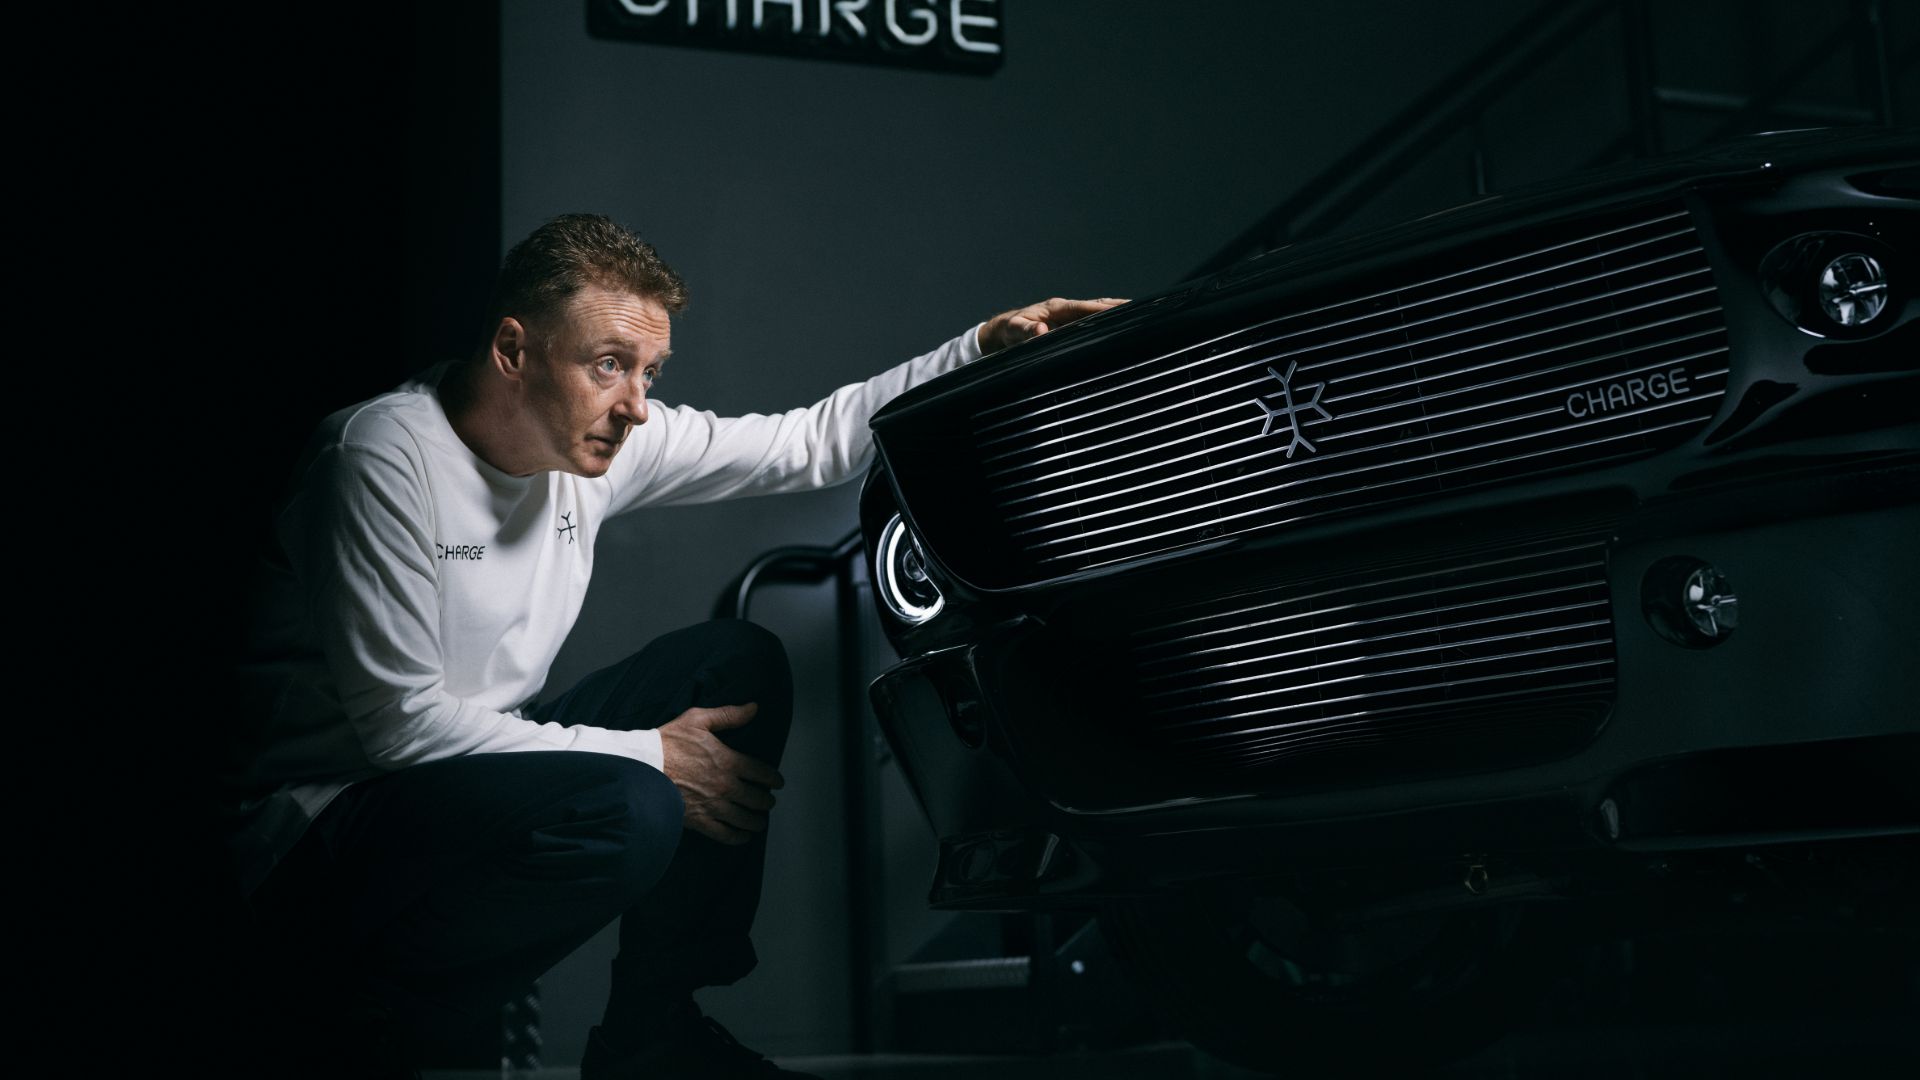 McLaren mind moves to electrify classic Mustangs